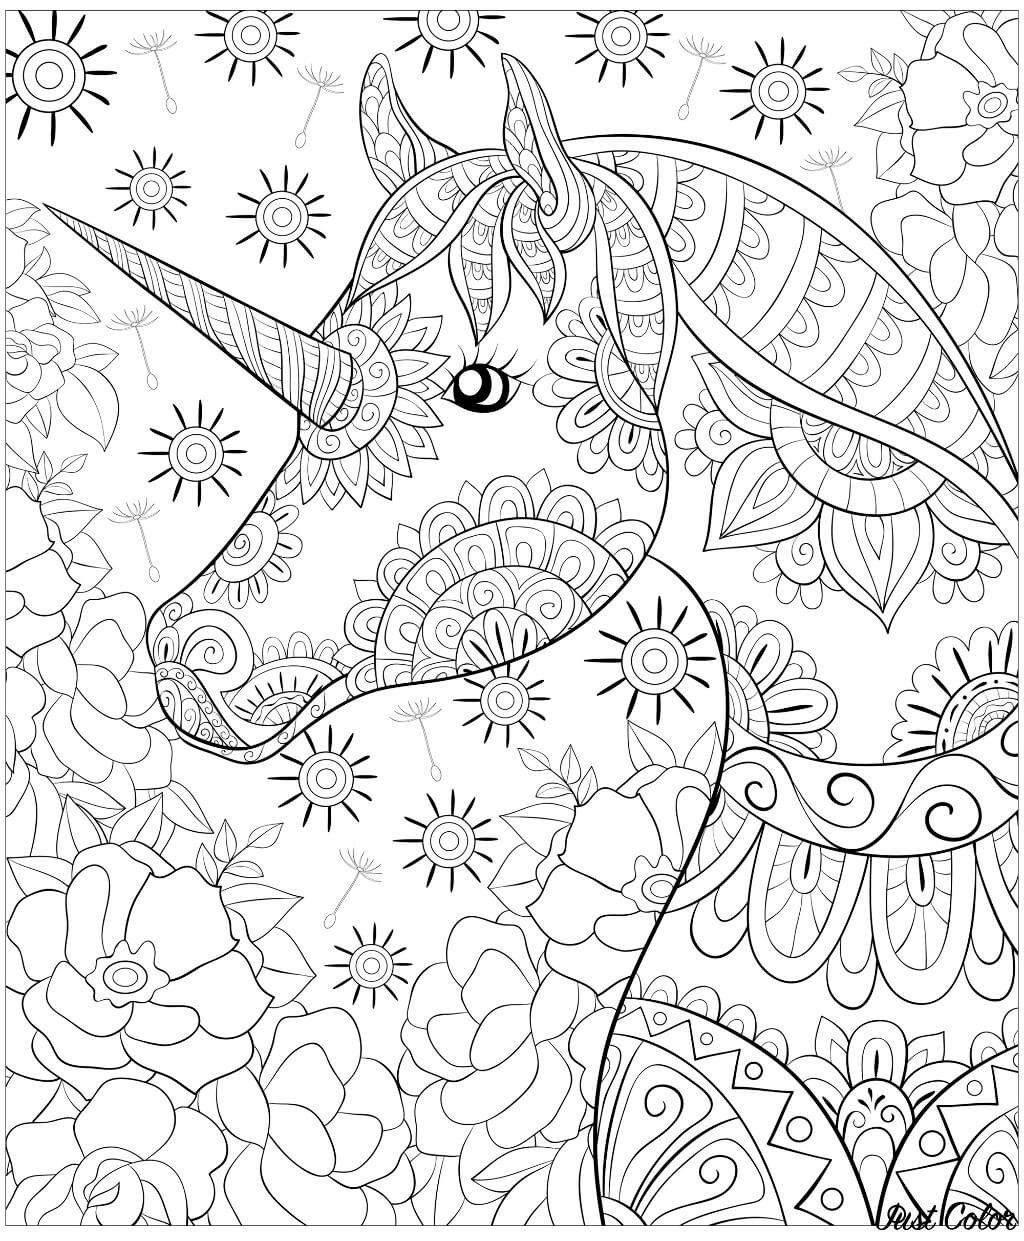 20 Printable Unicorn Coloring Pages for Adults   Happier Human